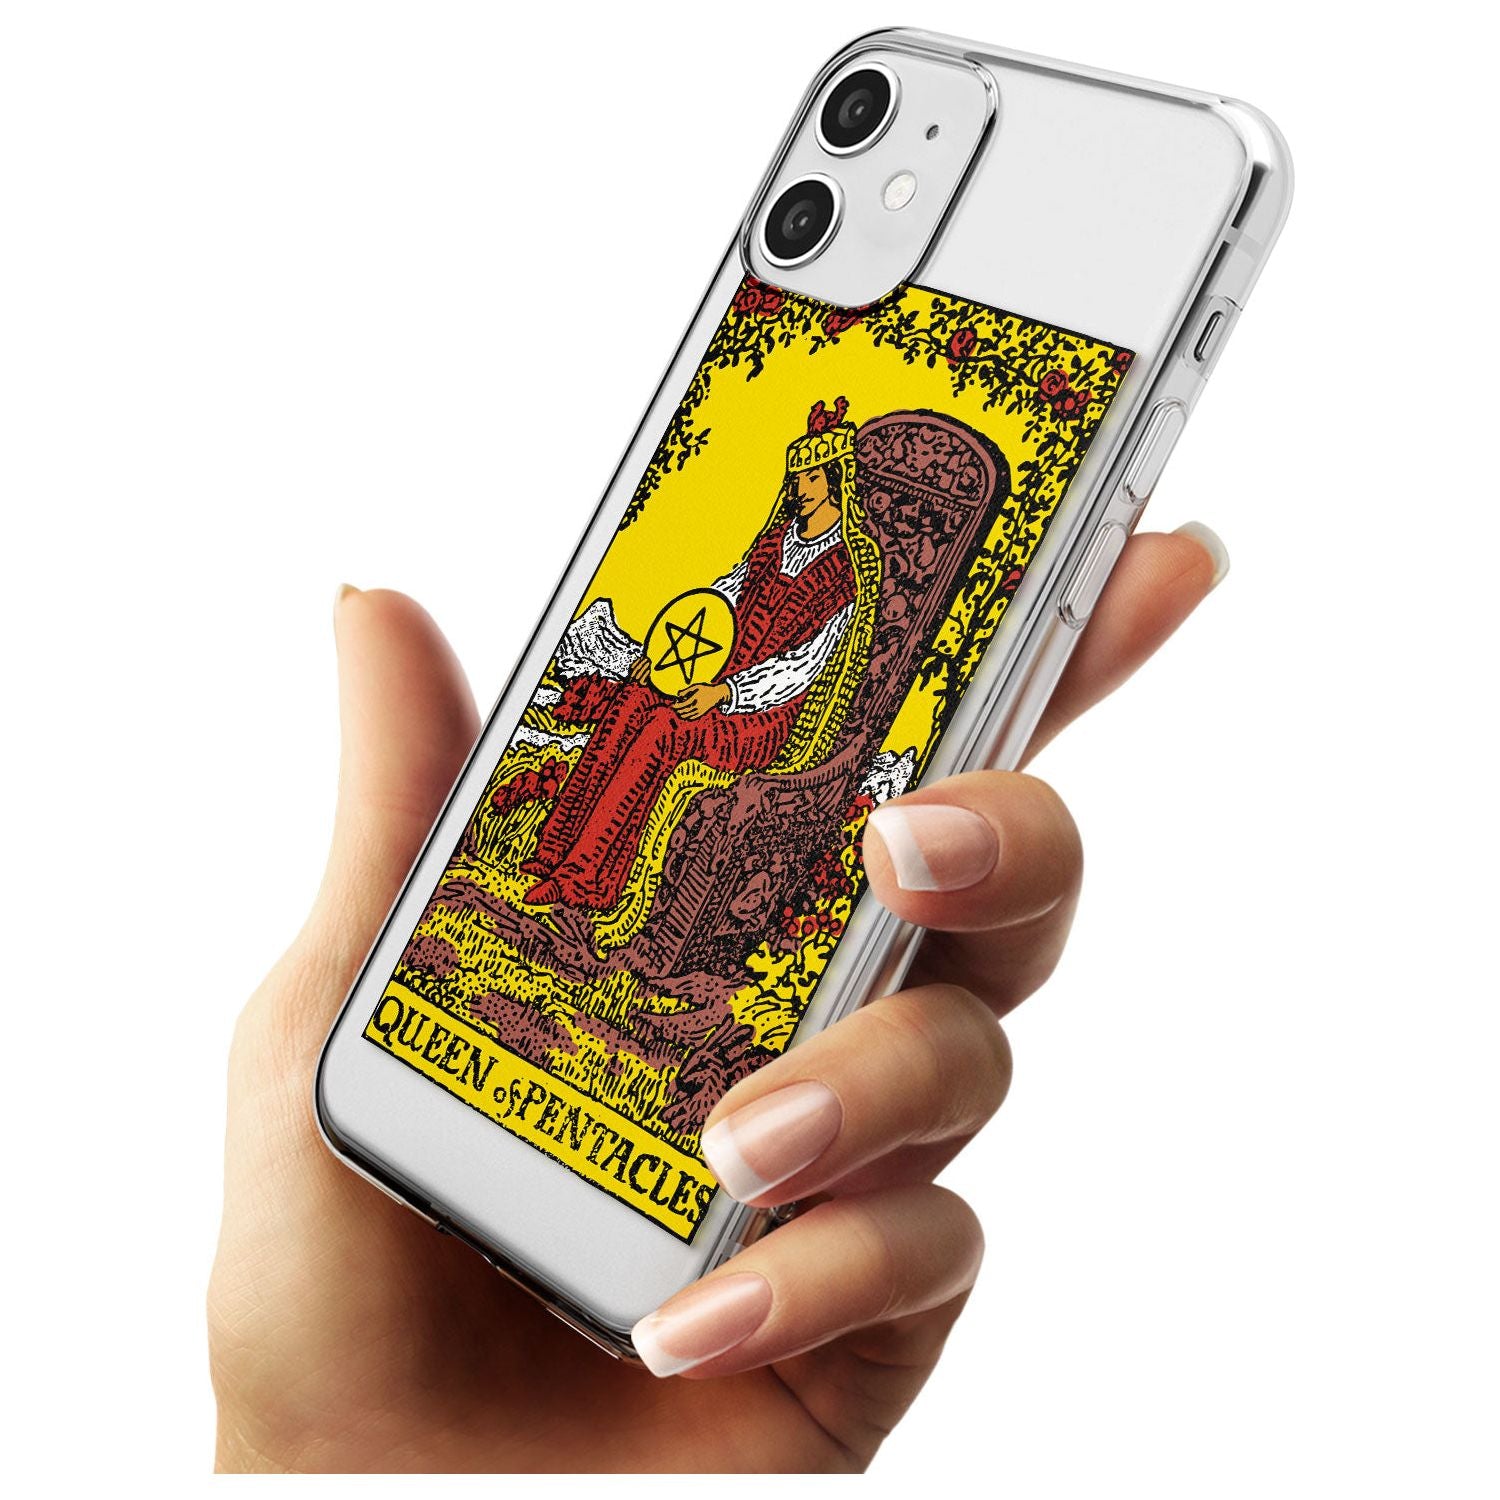 Queen of Pentacles Tarot Card - Colour Black Impact Phone Case for iPhone 11